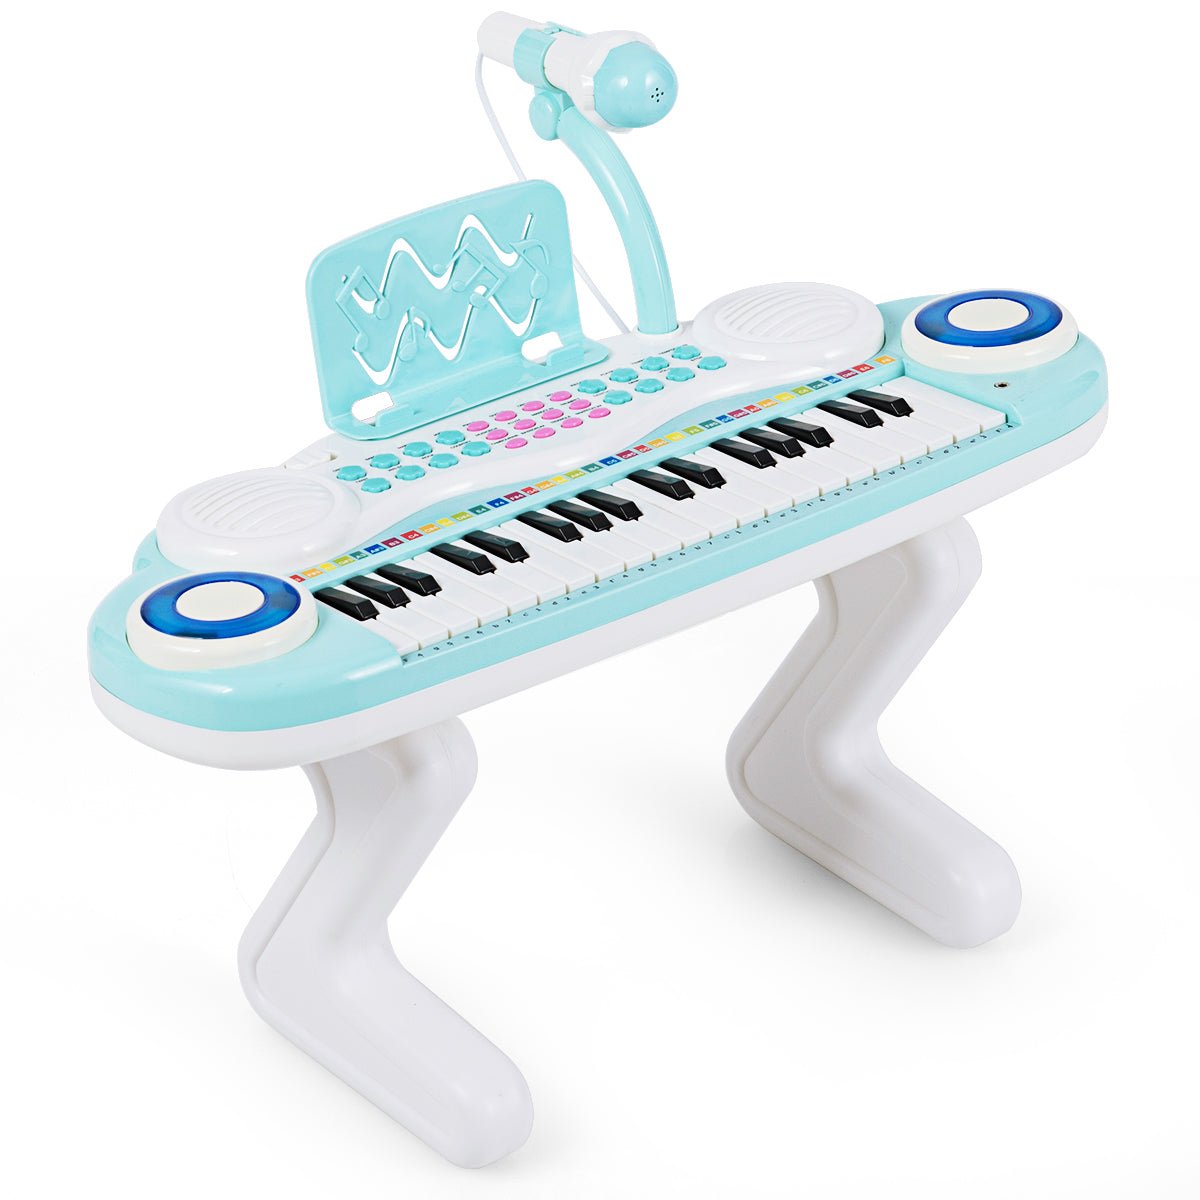 Shop the Blue Electronic Keyboard Piano with Microphone for Kids